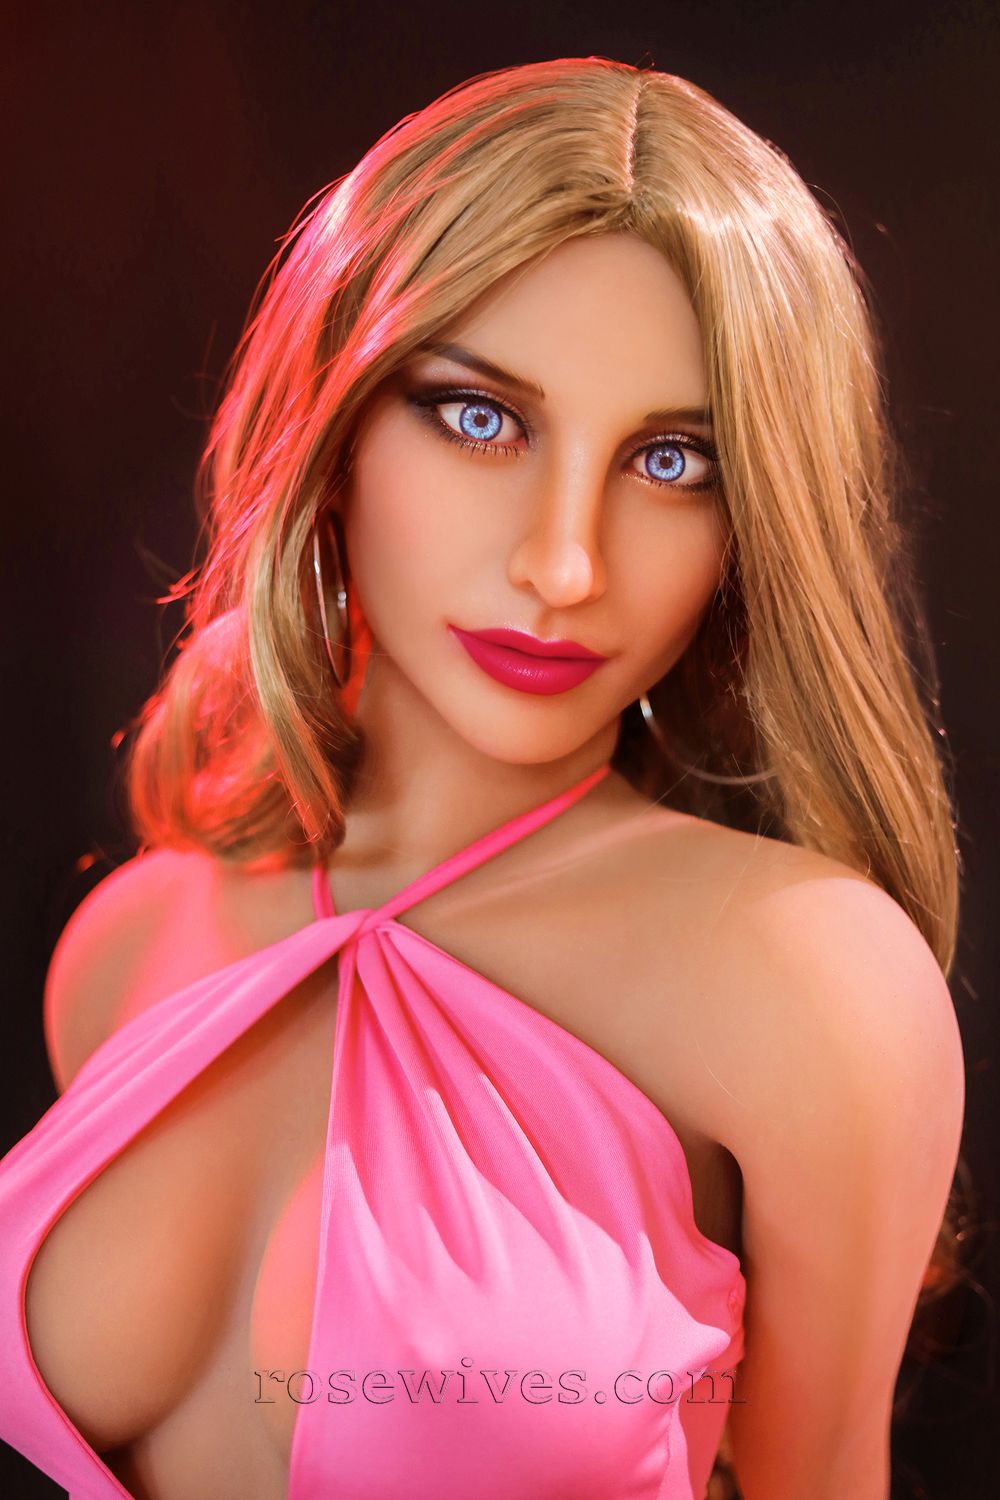 Blonde Sex Doll with blue eyes, buy genuine SYDoll from Rosewives